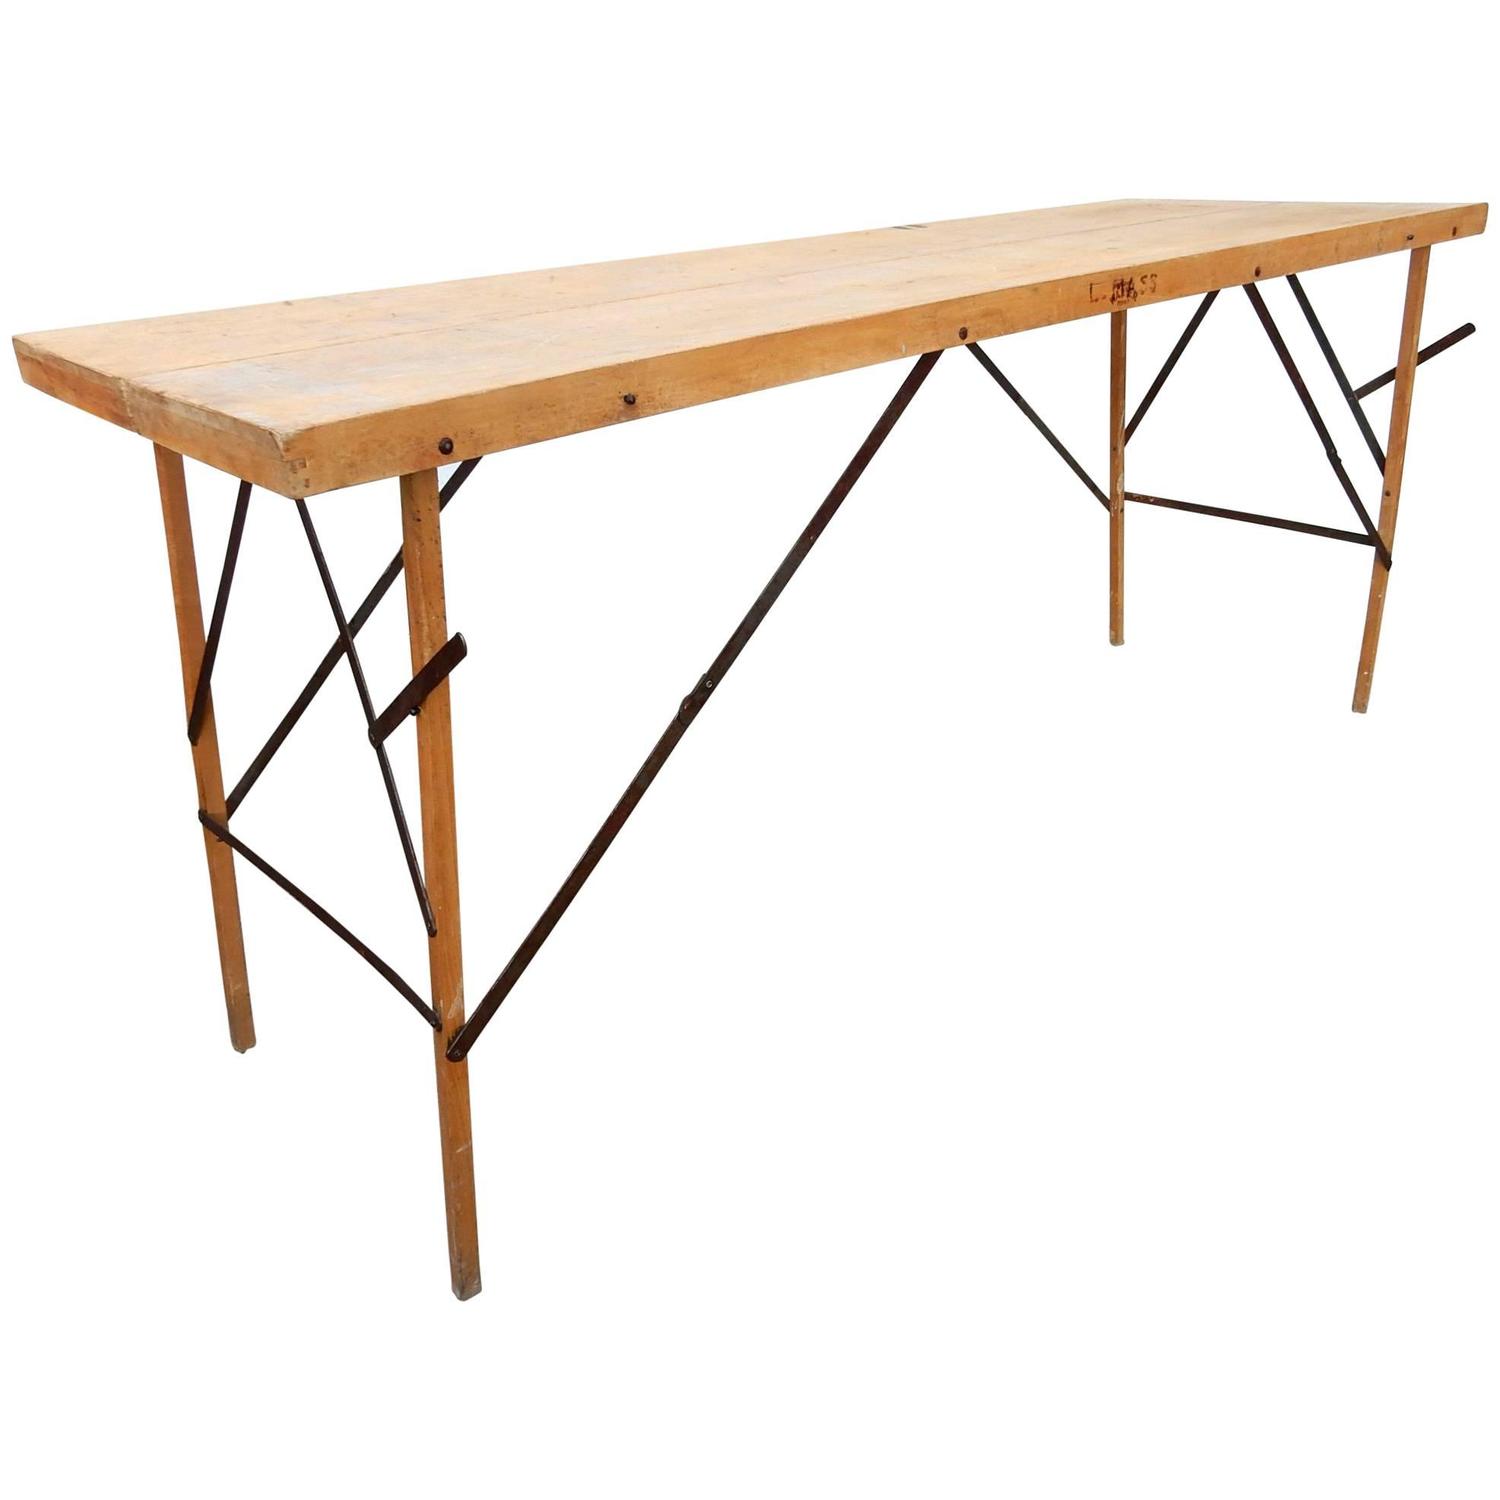 1930s Industrial Wallpaper Hangers Folding Table Or Desk At